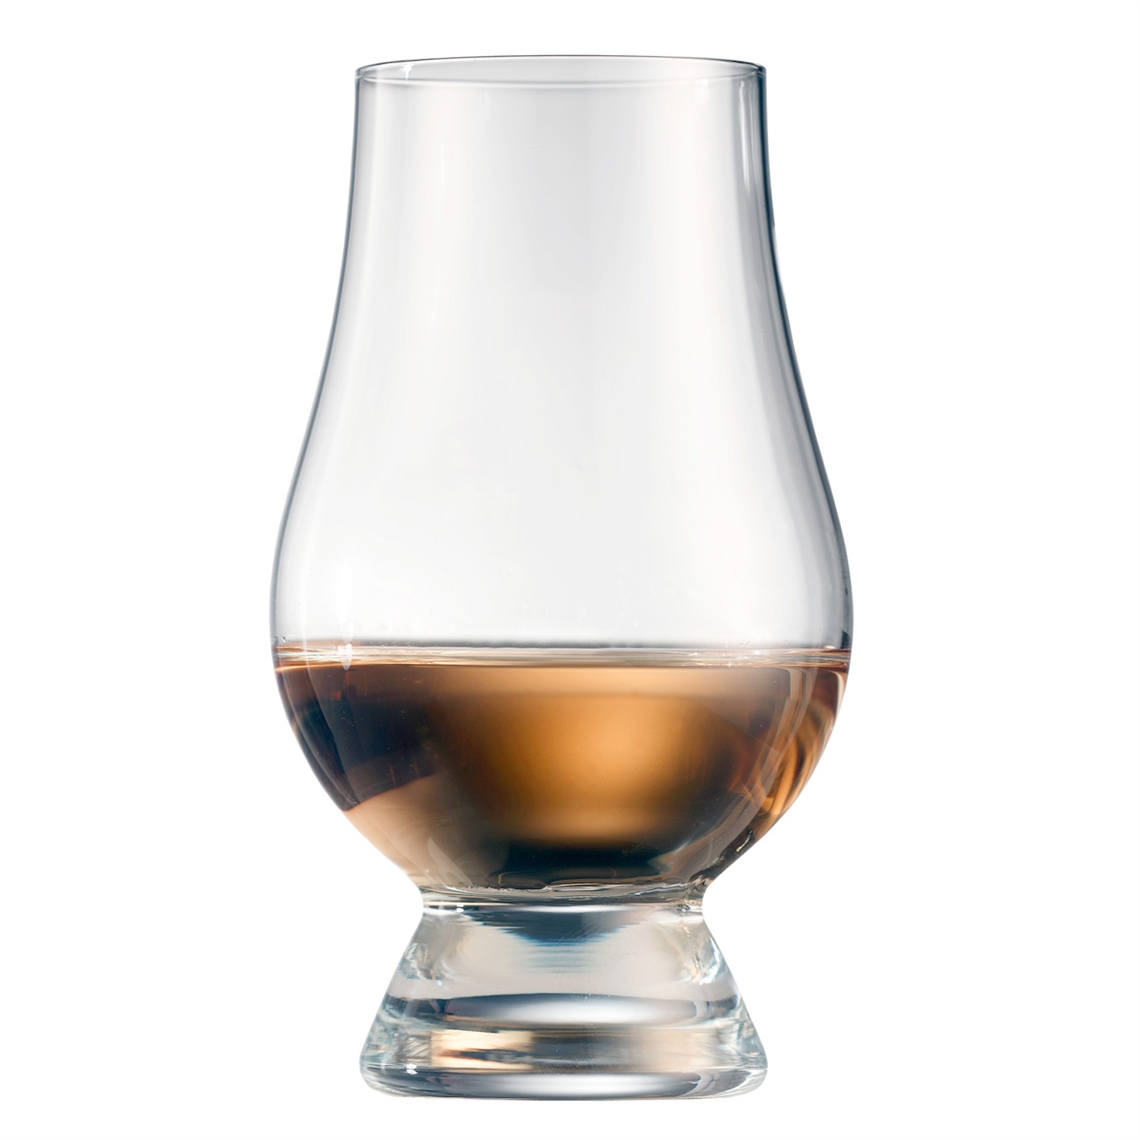 View more how do i aerate wine? from our Whisky Glasses range